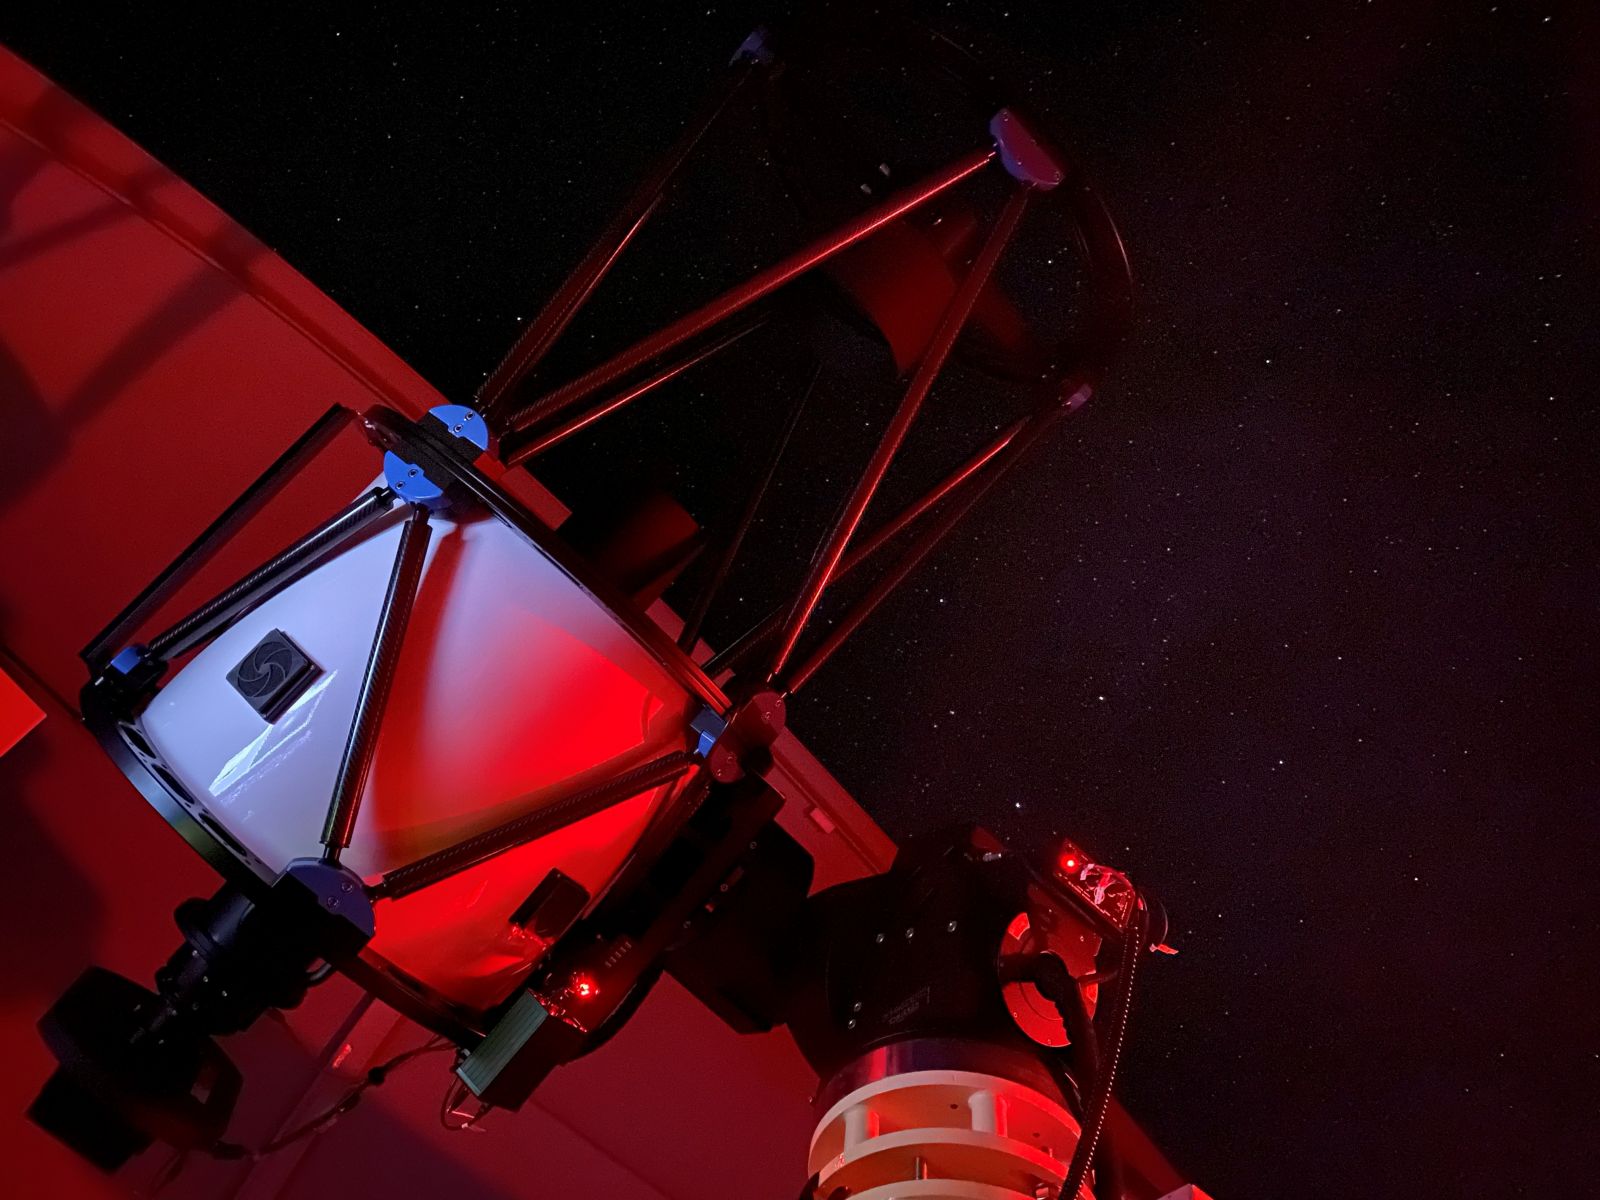 A picture of the PIRATE optical telescope within a closed dome.